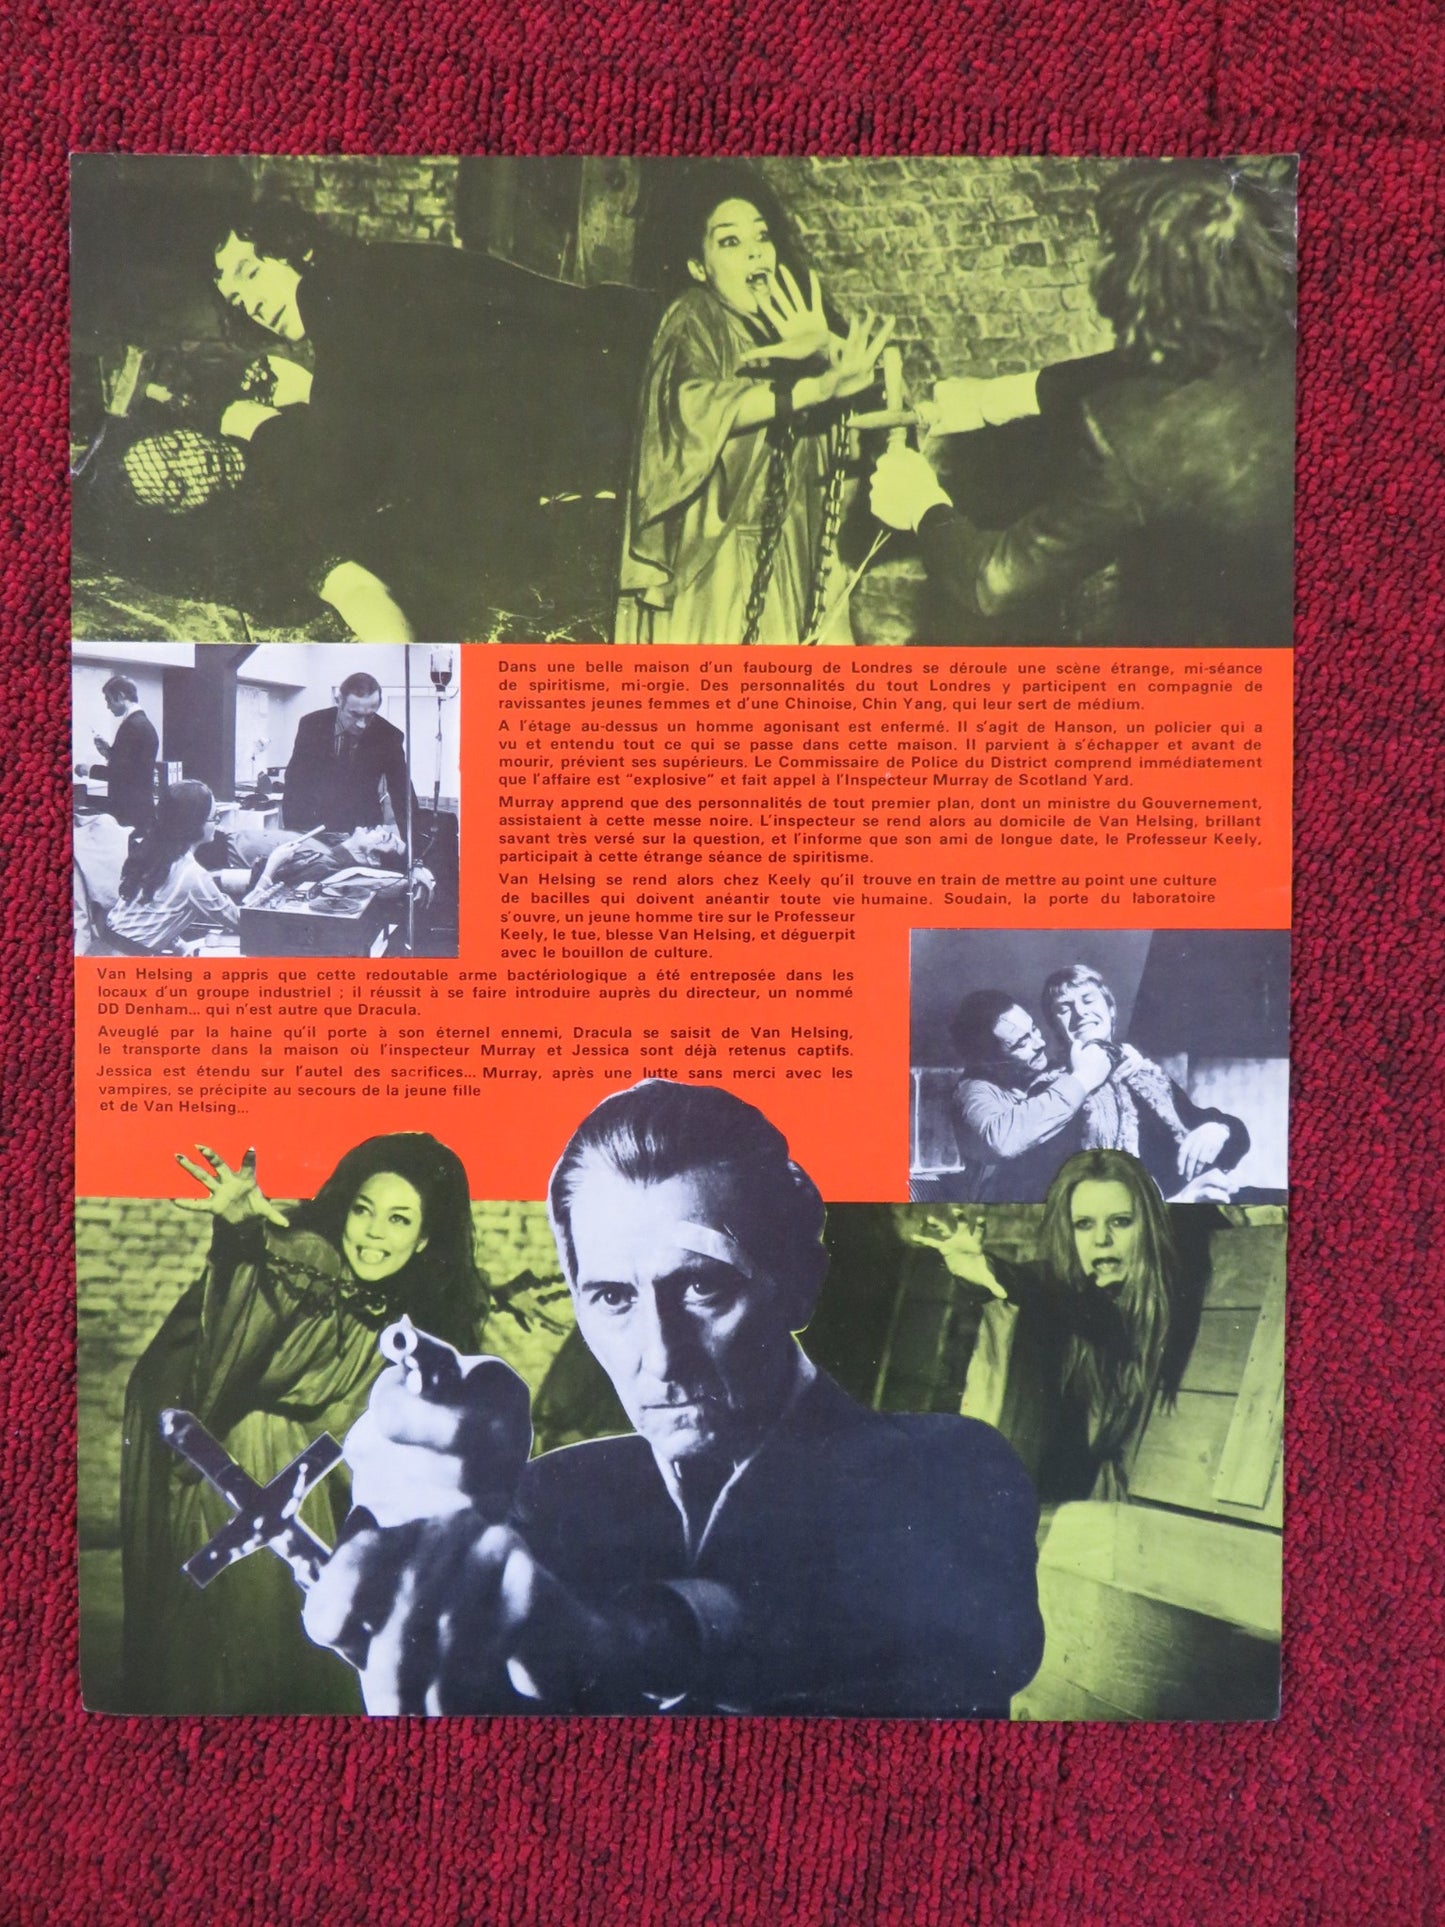 THE SATANIC RITES OF DRACULA FRENCH PRESS SHEET HAMMER CHRISTOPHER LEE 1973